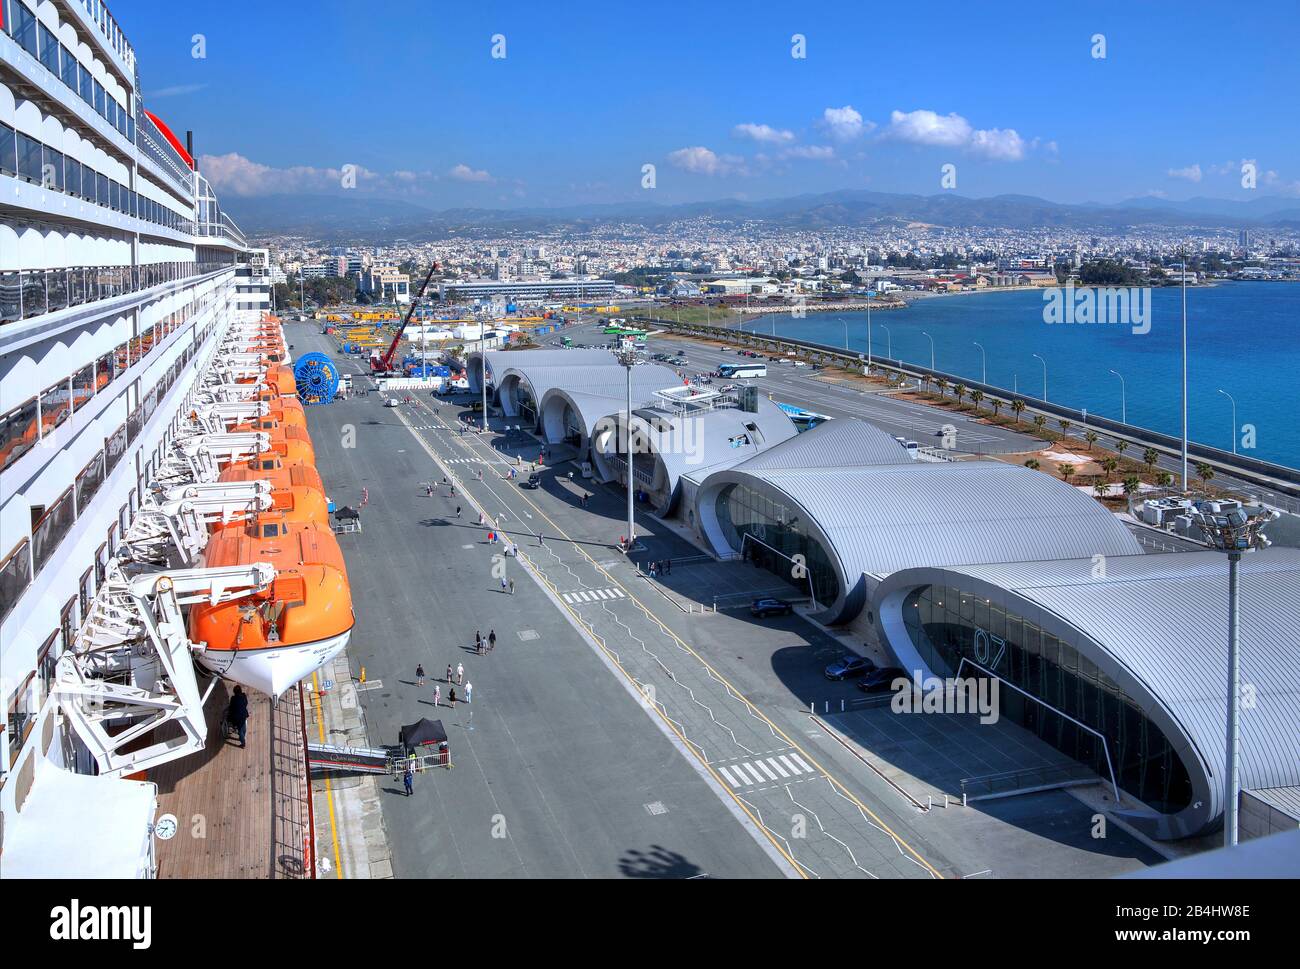 Boat deck of cruise ship Queen Mary 2 with view on cruise terminal Sea and city Limassol, Bay of Akrotiri, Mediterranean Sea, Cyprus Stock Photo